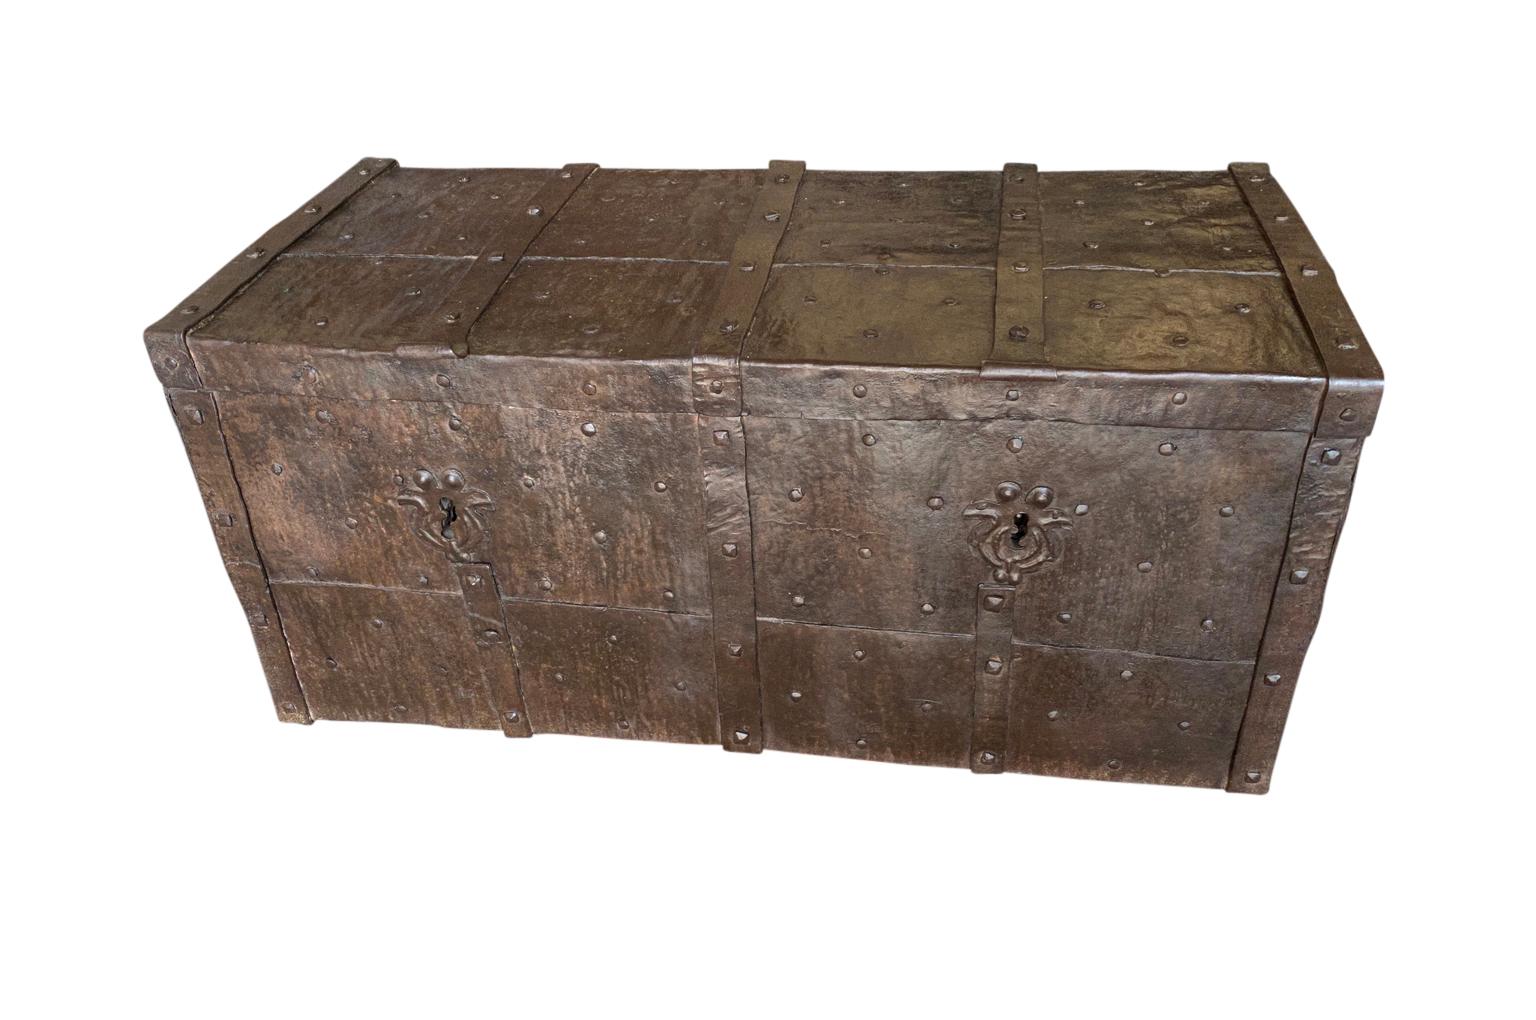 An exceptional 17th century Coffre Forte - Strong Box from the Lombardy area of Italy. Expertly crafted from iron with side handles, iron strapping and nail head detailing. Serves wonderfully as a coffee table with great storage. Excellent patina.